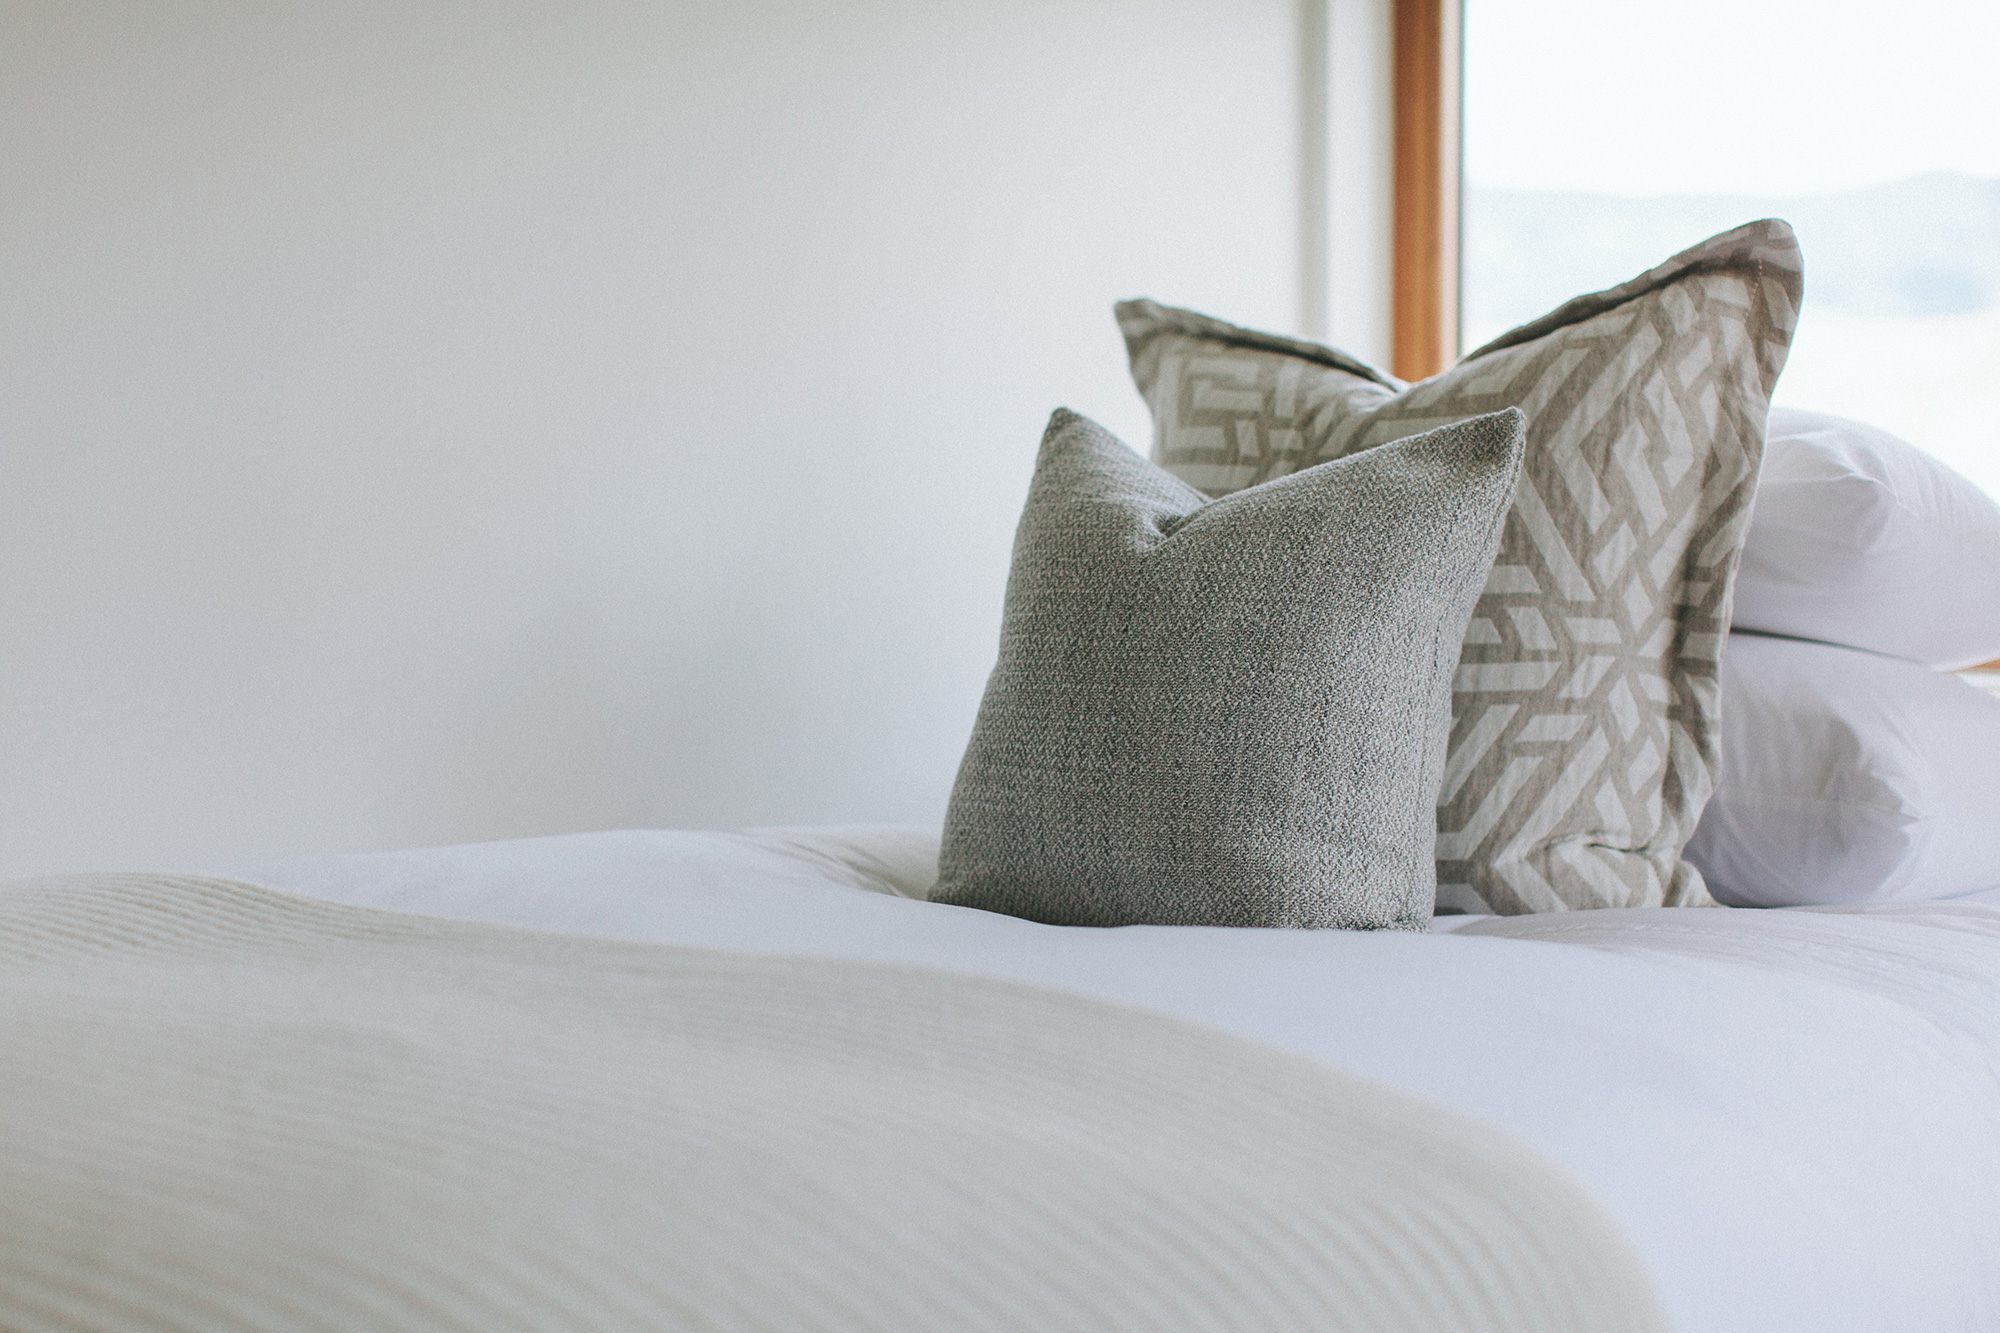  A modern white bed with two gray pillows  